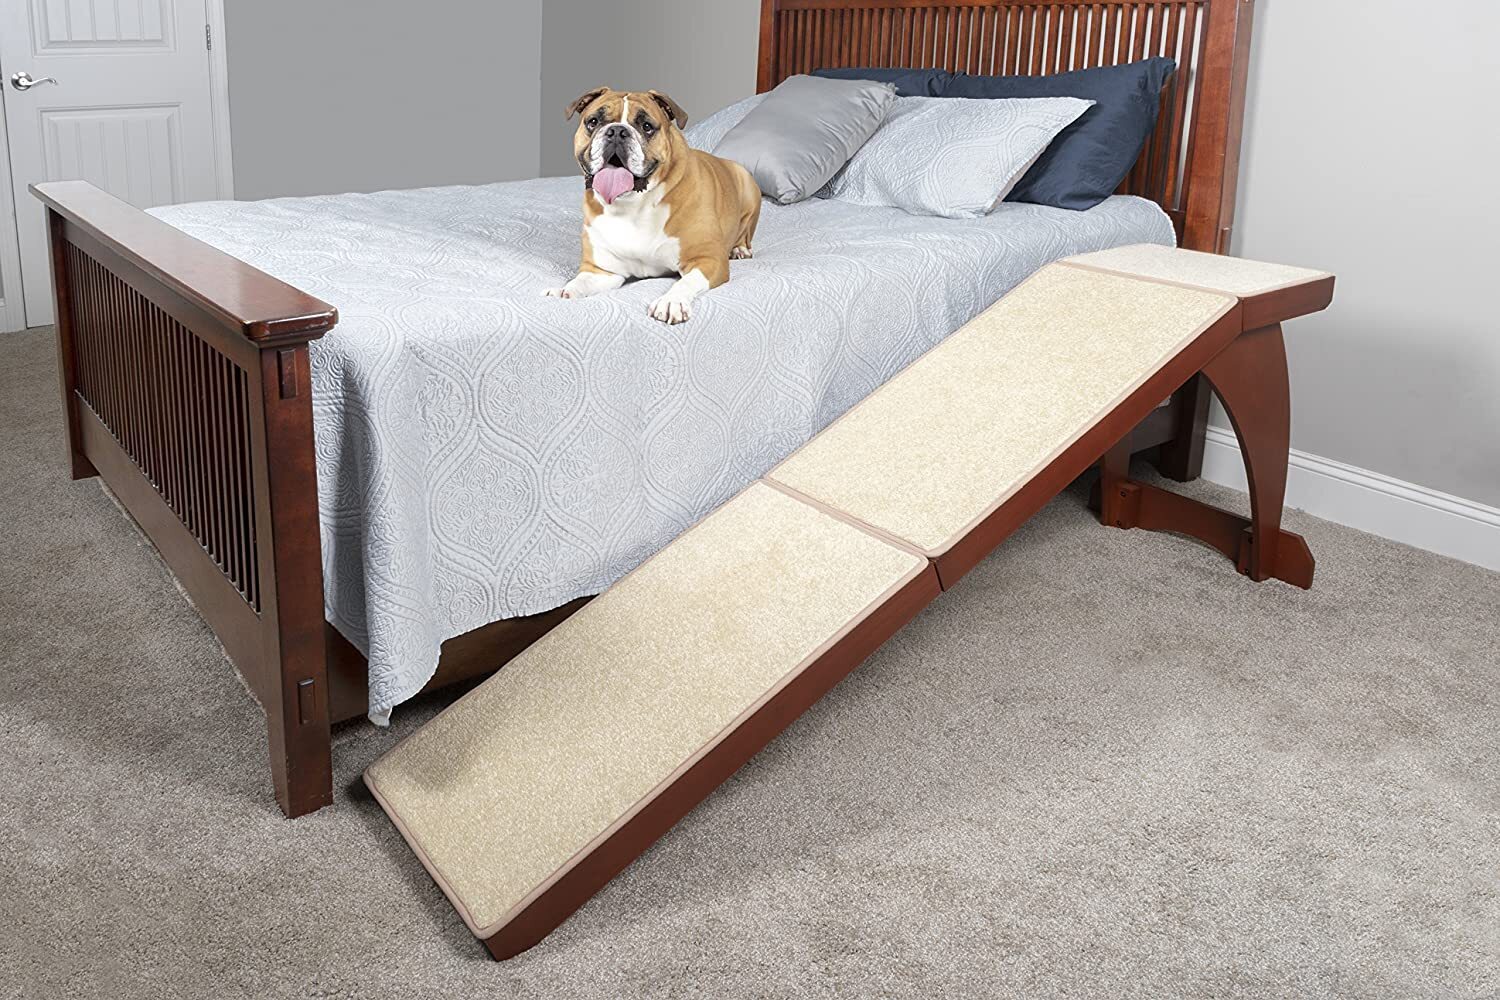 Cherry Wood Dog Ramp for High Bed